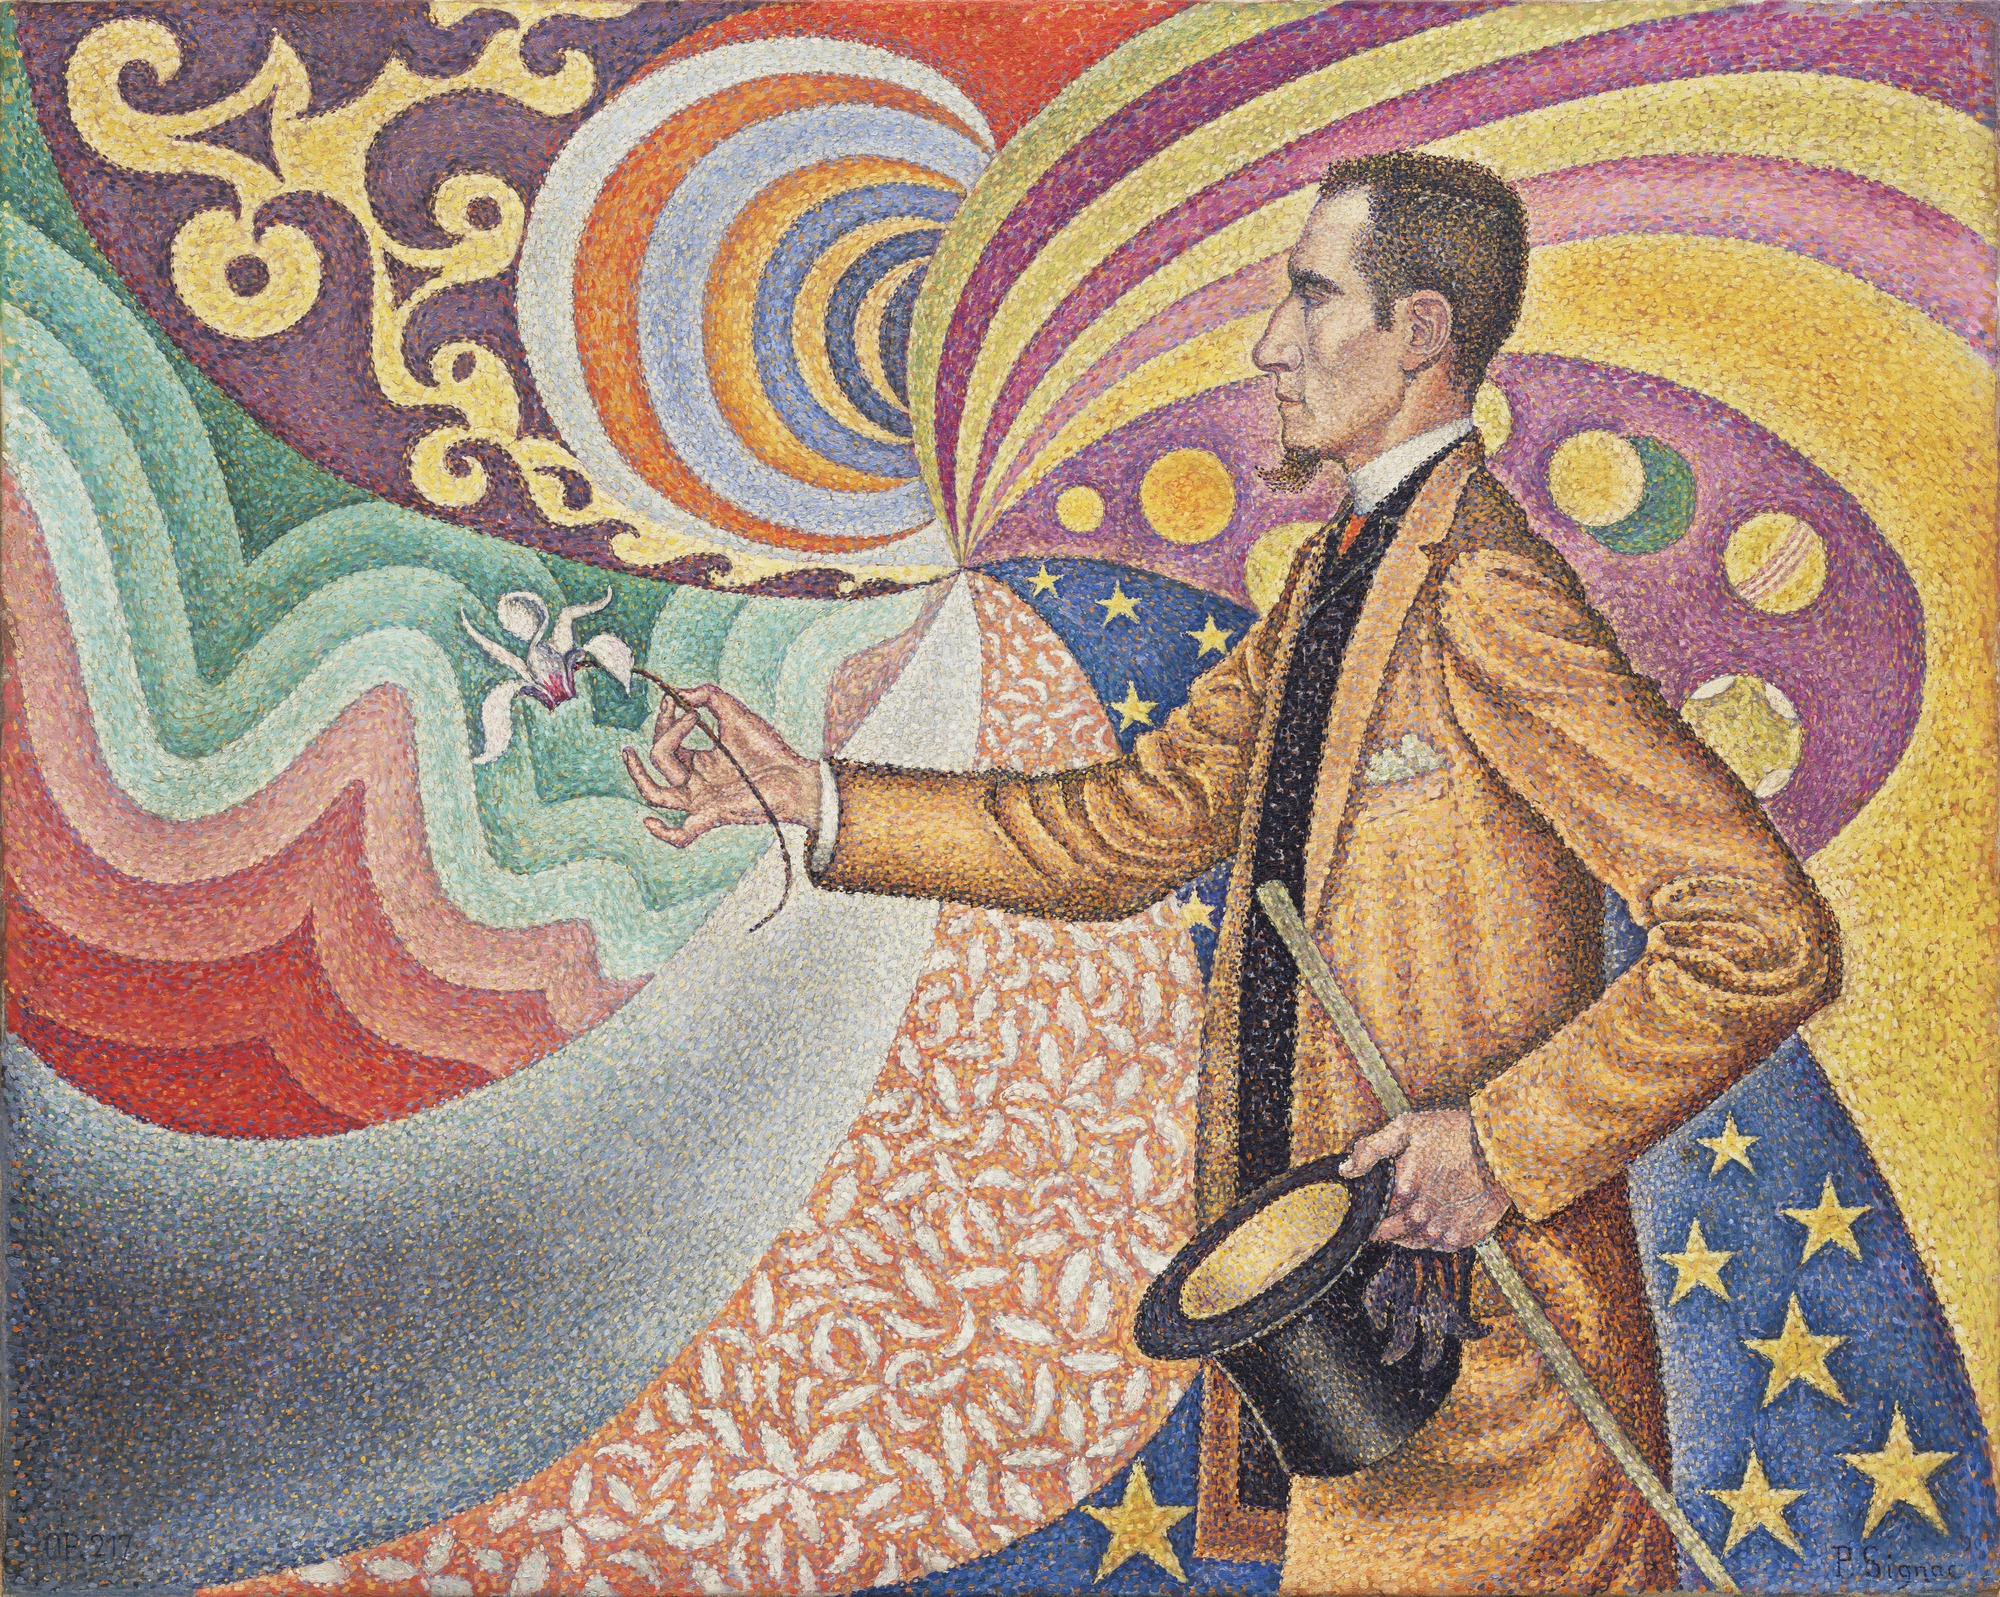 Opus 217. Against the Enamel of a Background Rhythmic with Beats and Angles, Tones, and Tints, Portrait of Félix Fénéon by Paul Signac - 1890 - 73.5 x 92.5 cm Museum of Modern Art